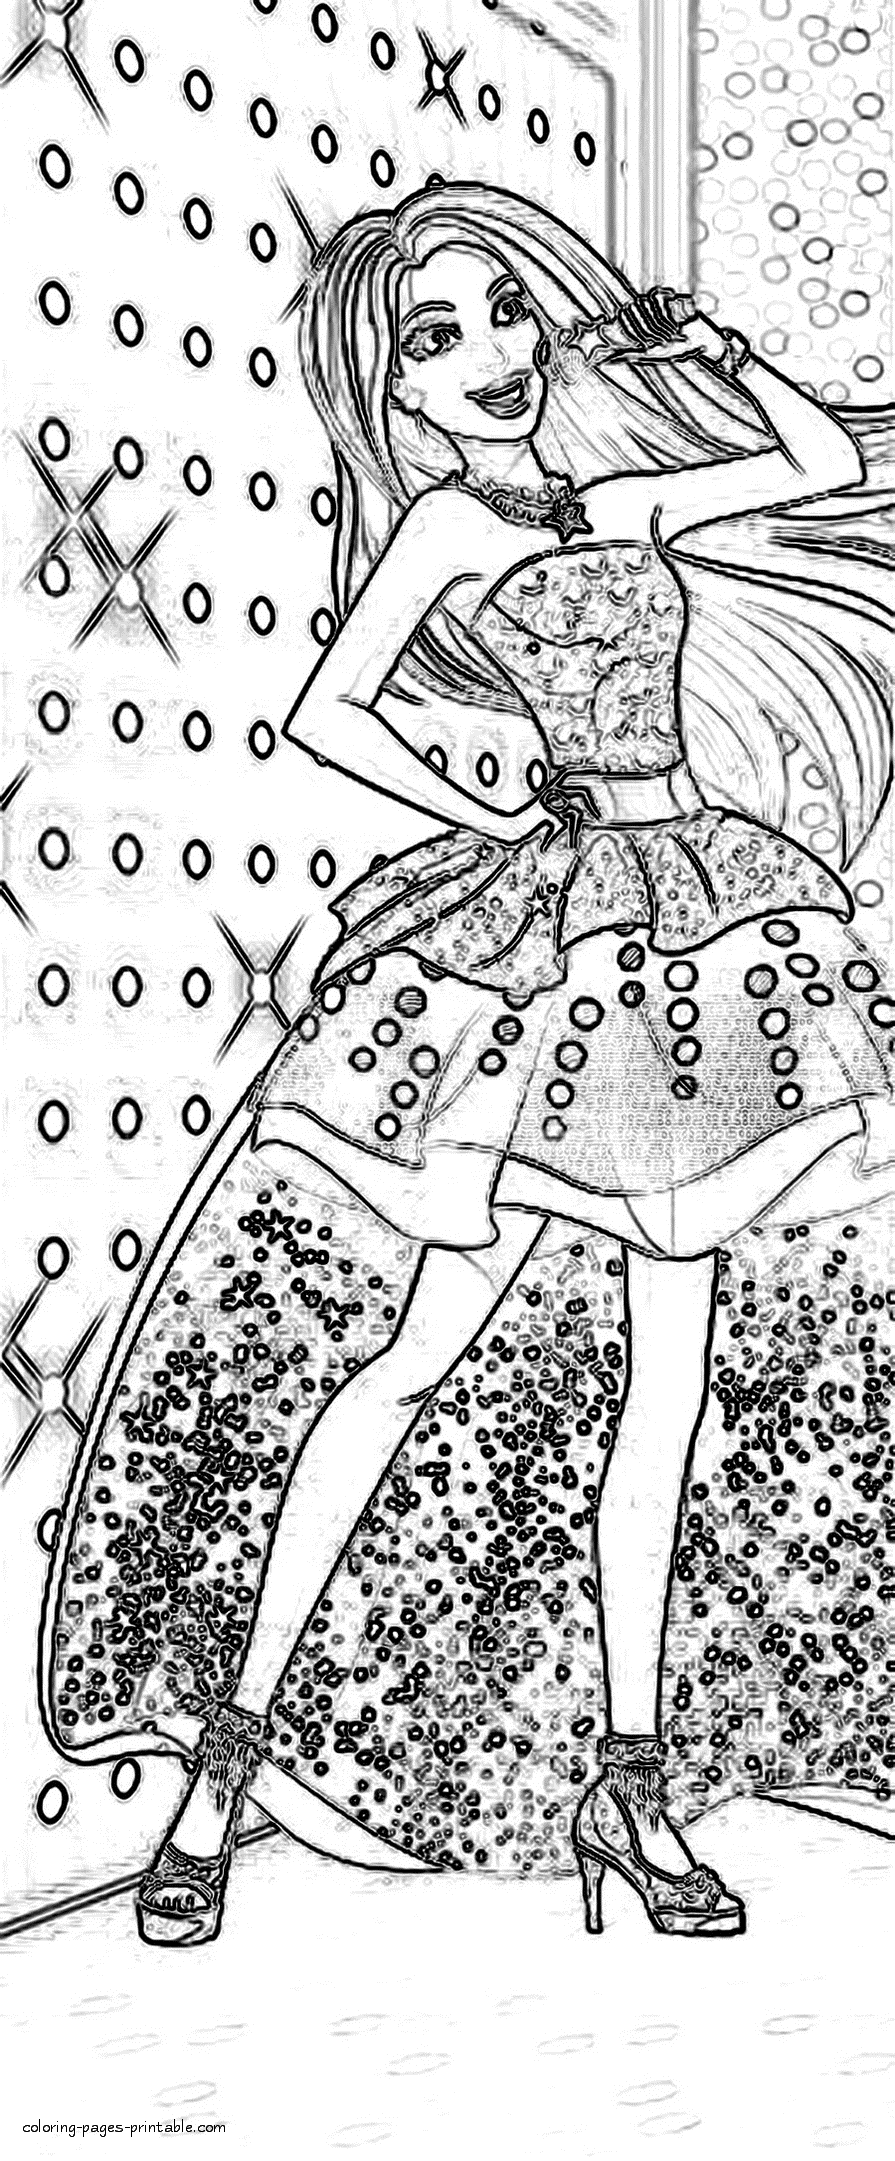 barbie-in-rock-n-royals-free-coloring-pages-11-coloring-pages-printable-com